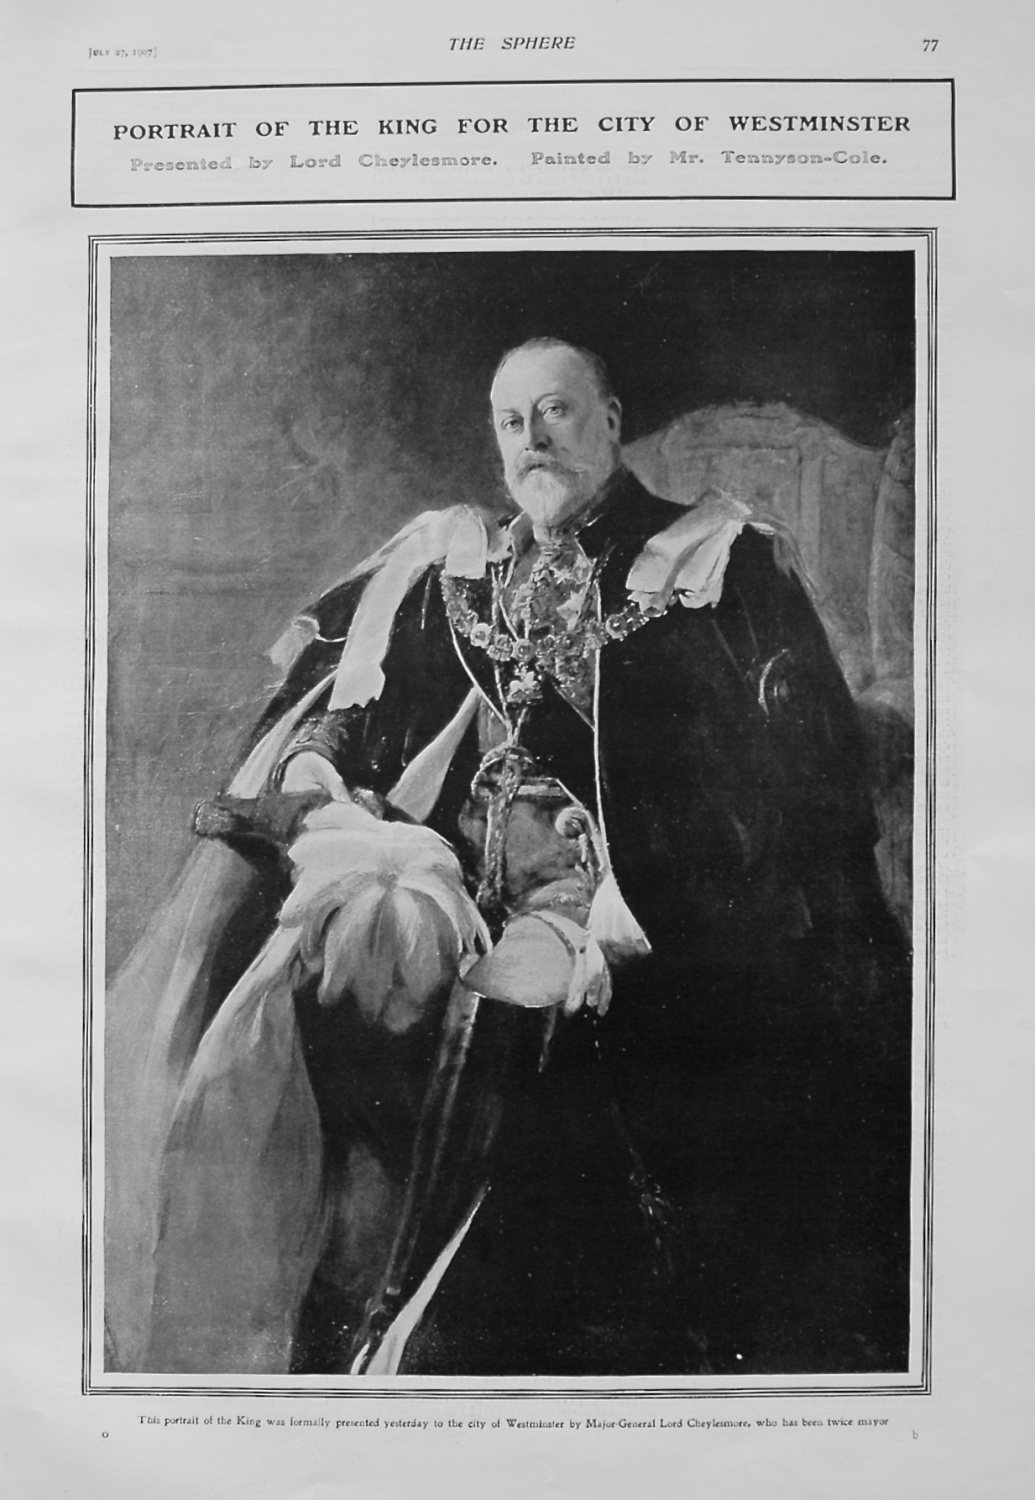 Portrait of the King for the City of Westminster. Presented by Lord Cheyles